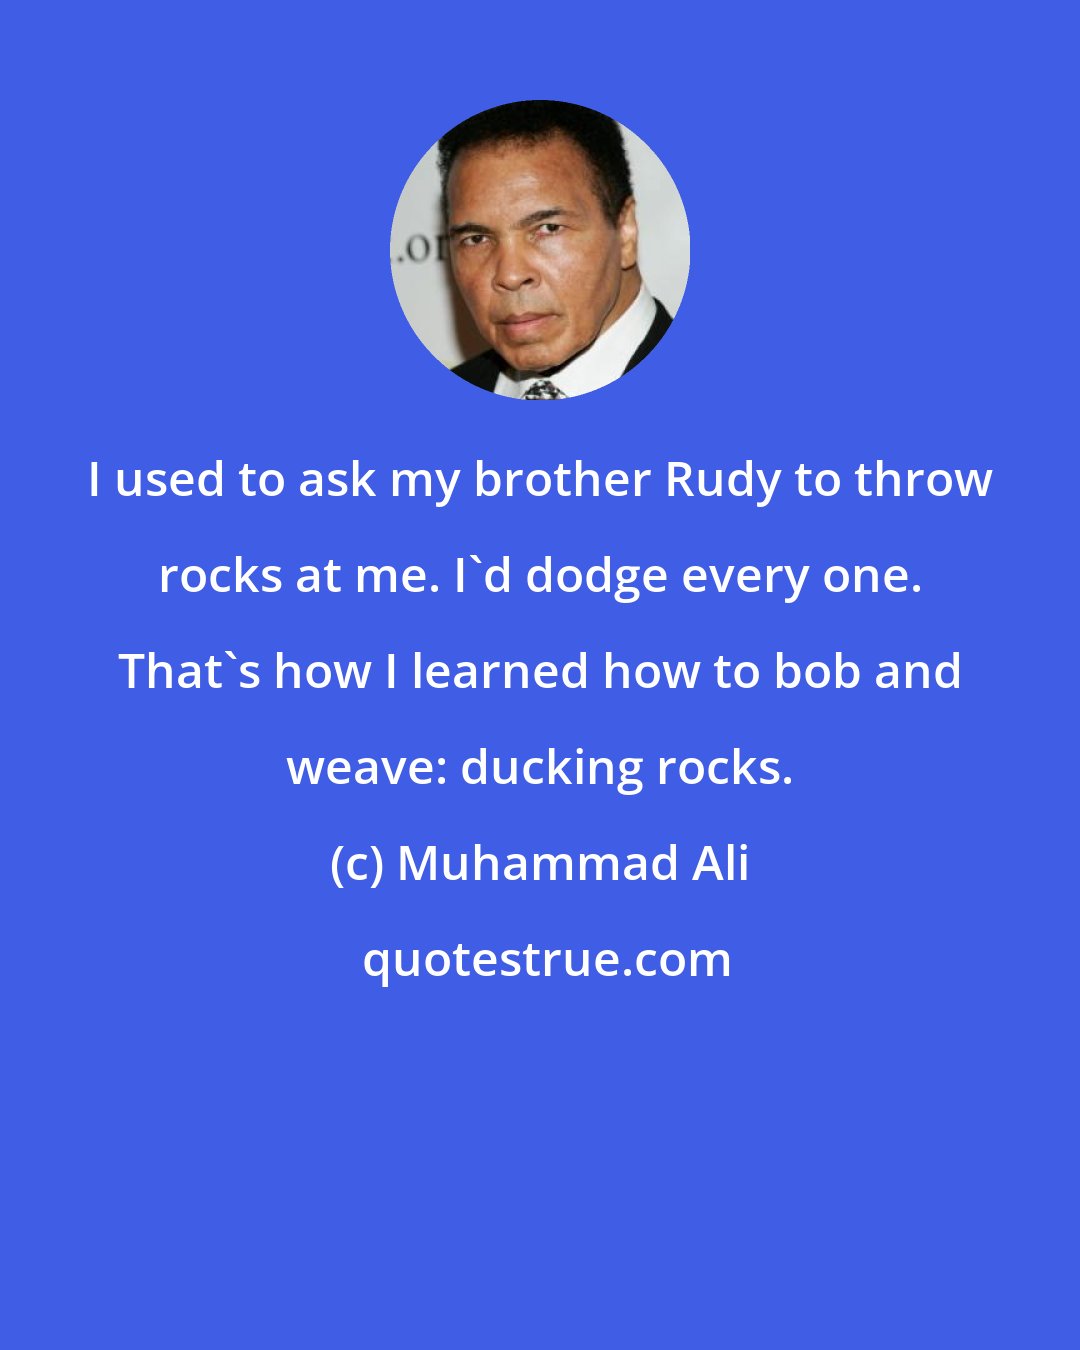 Muhammad Ali: I used to ask my brother Rudy to throw rocks at me. I'd dodge every one. That's how I learned how to bob and weave: ducking rocks.